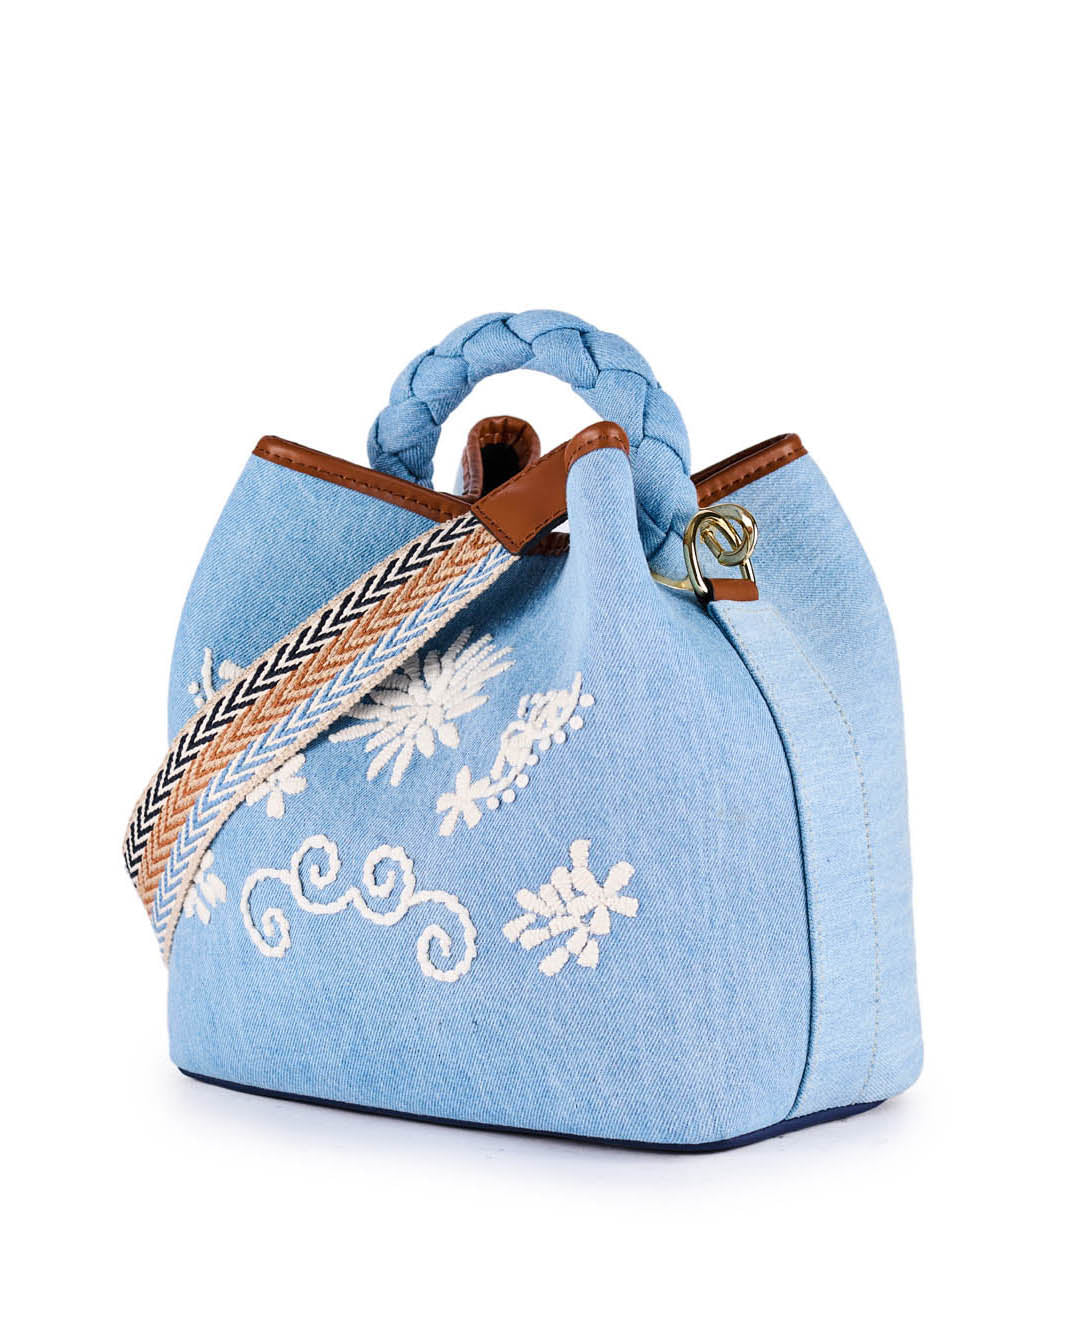 Light blue denim handbag with white floral embroidery and braided strap